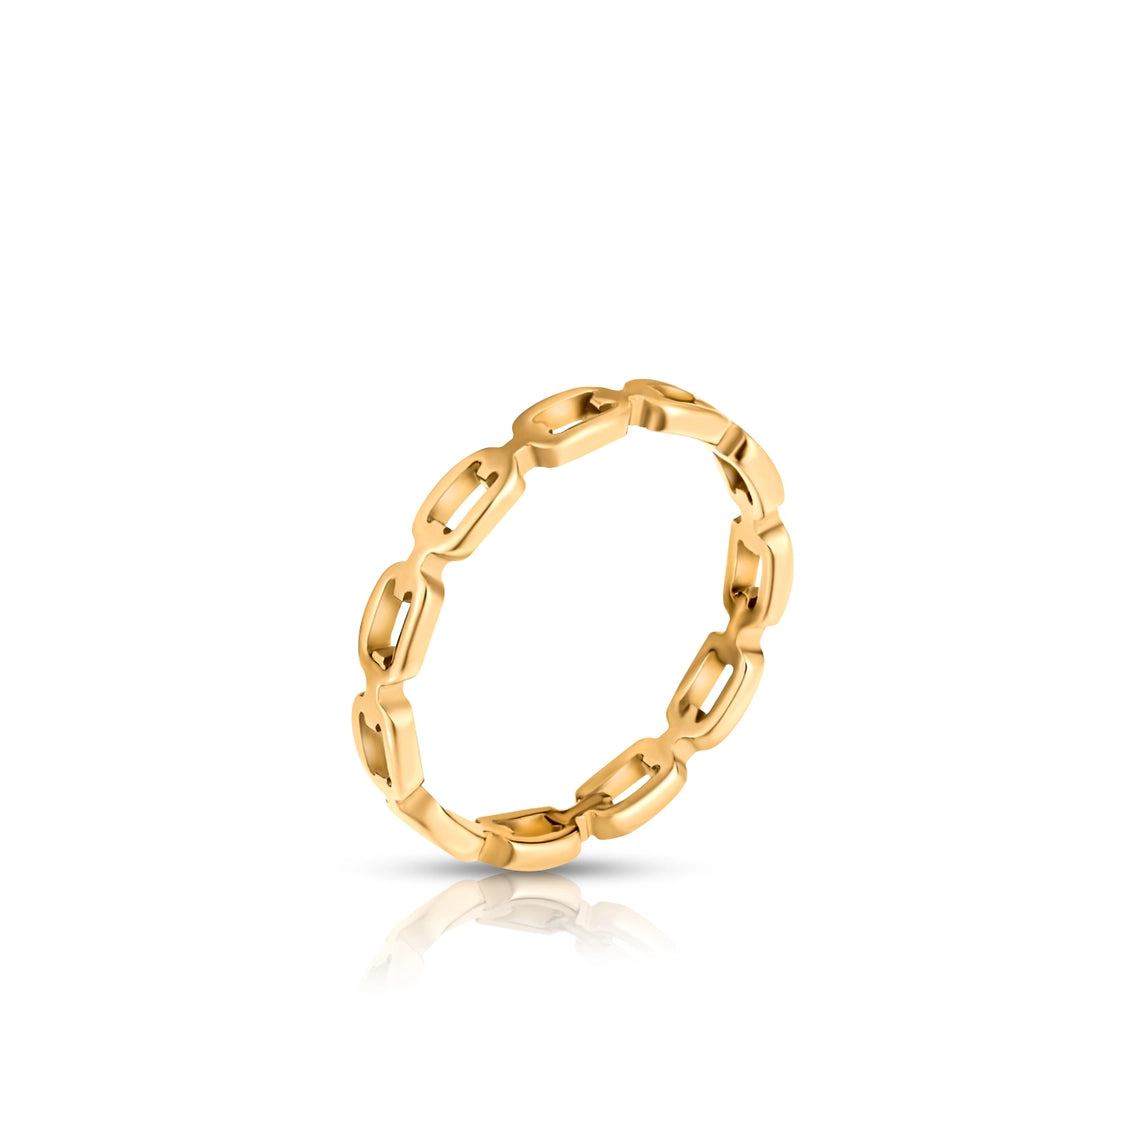 Ellie Vail - Billy Dainty Chain Link Ring